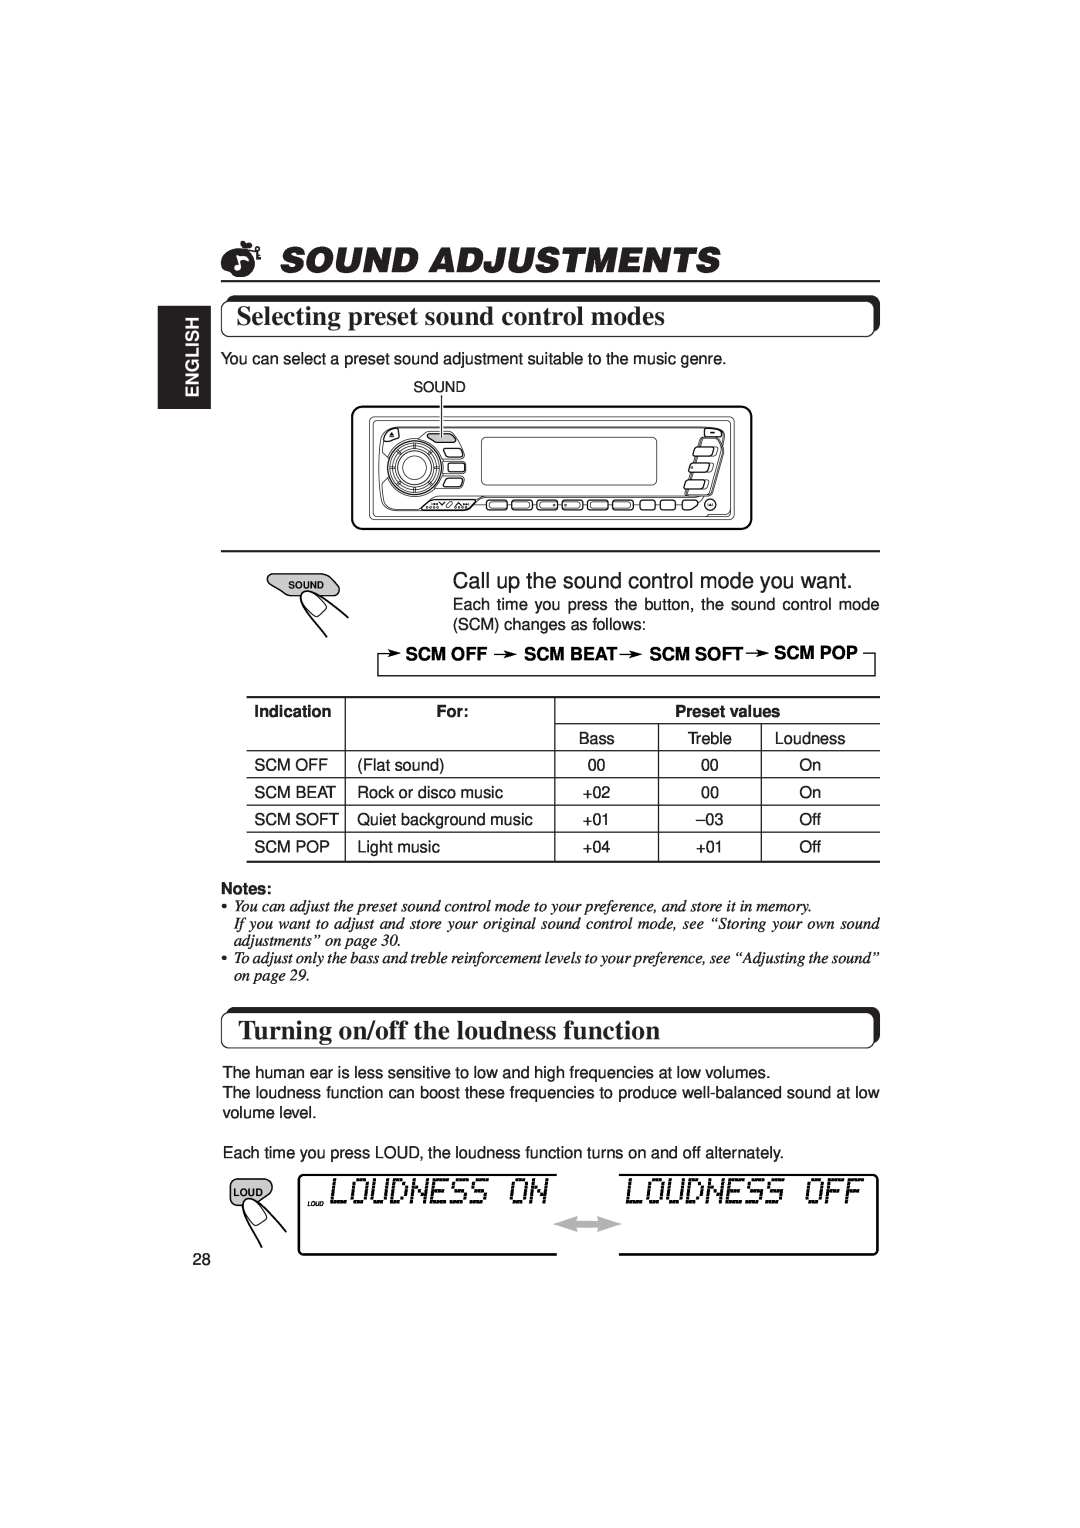 JVC KD-MX2900R Sound Adjustments, Selecting preset sound control modes, Turning on/off the loudness function, English 